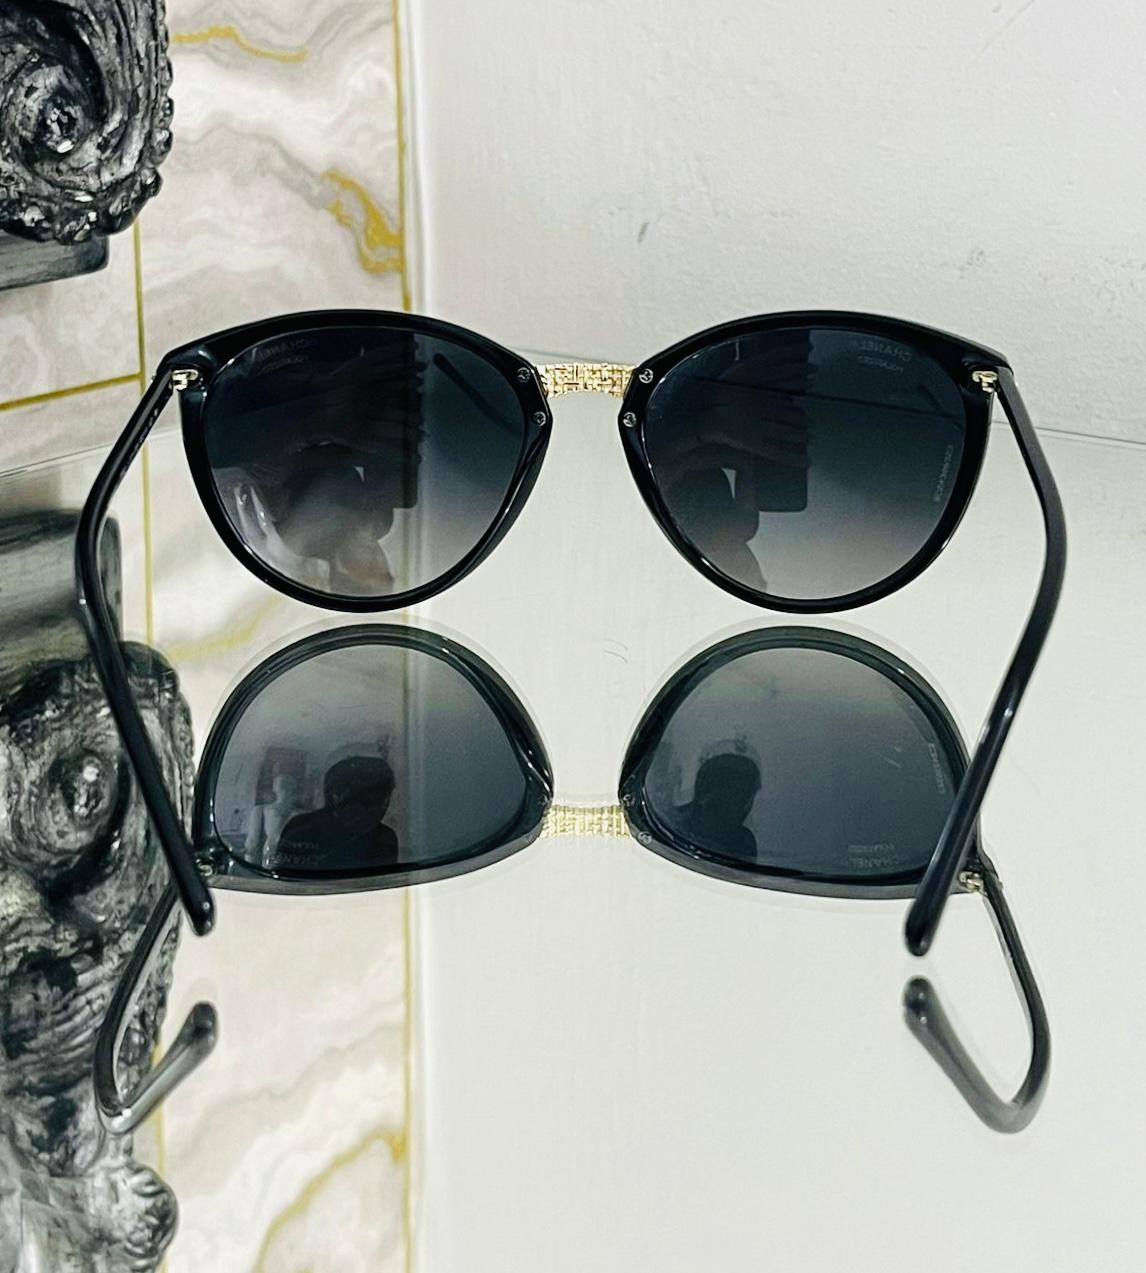 Chanel Polarised Butterfly Sunglasses

Black framed sunglasses designed with black lenses.

Detailed with gold decorative bridge and 'CC' logo at the temple on each side.

Polarized sunglasses are ideal for winter, they help to reduce the glare,